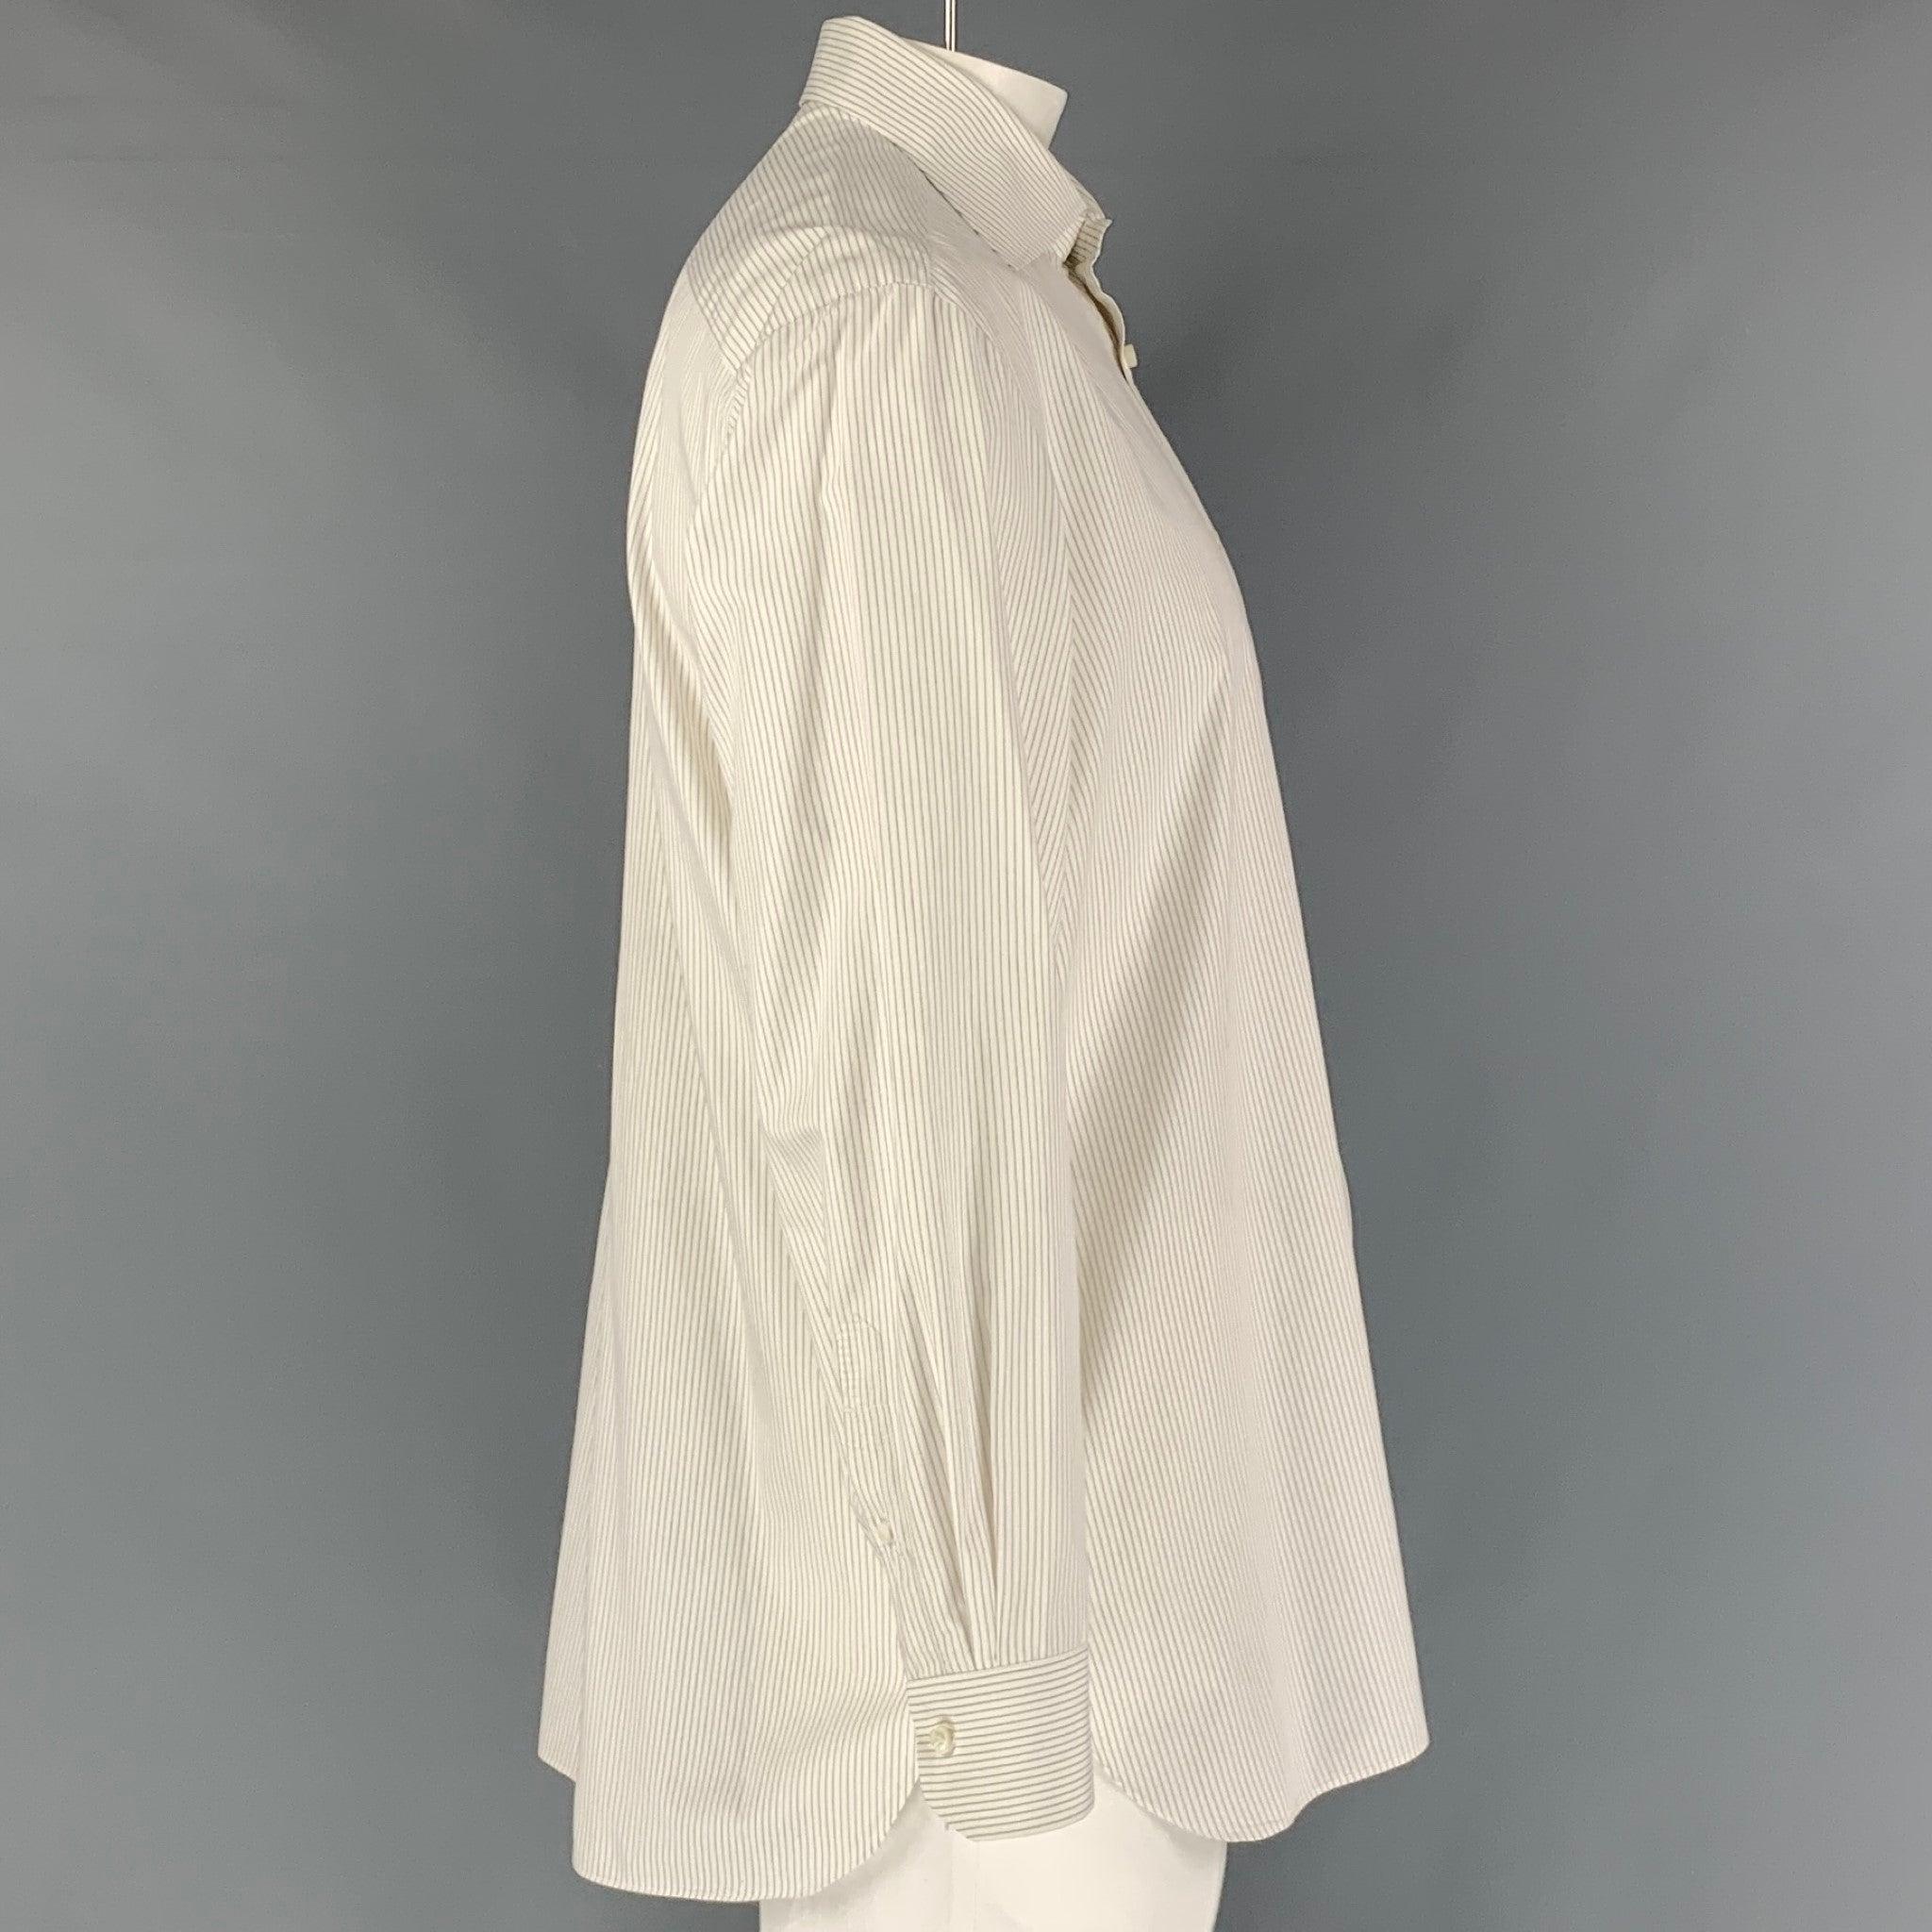 BORRELLI long sleeve shirt comes in white stripped cotton featuring a full cutaway collar and a buttoned closure. Made in Italy.Very Good Pre-Owned Condition. 

Marked:   43-17 

Measurements: 
 
Shoulder: 20 inches Chest: 50 inches Sleeve: 26